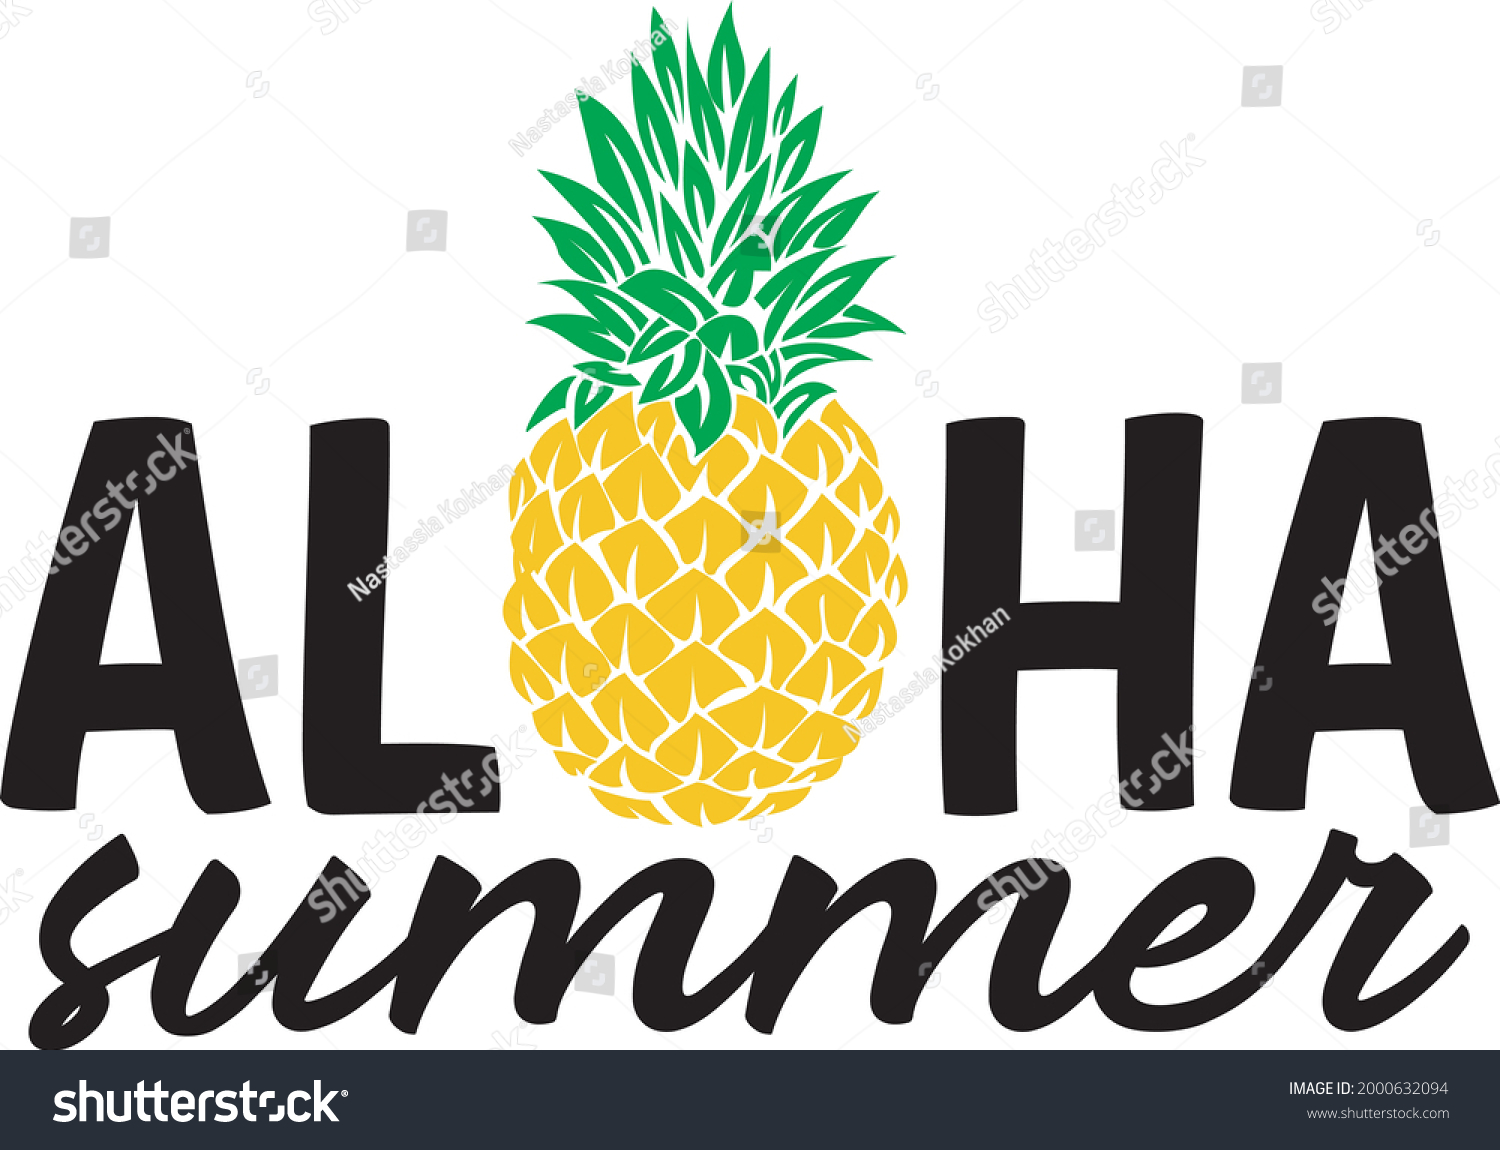 SVG of Aloha summer svg vector Illustration isolated on white background. Aloha with pineapple. Summer shir design. Summer quote. Summer saying design svg